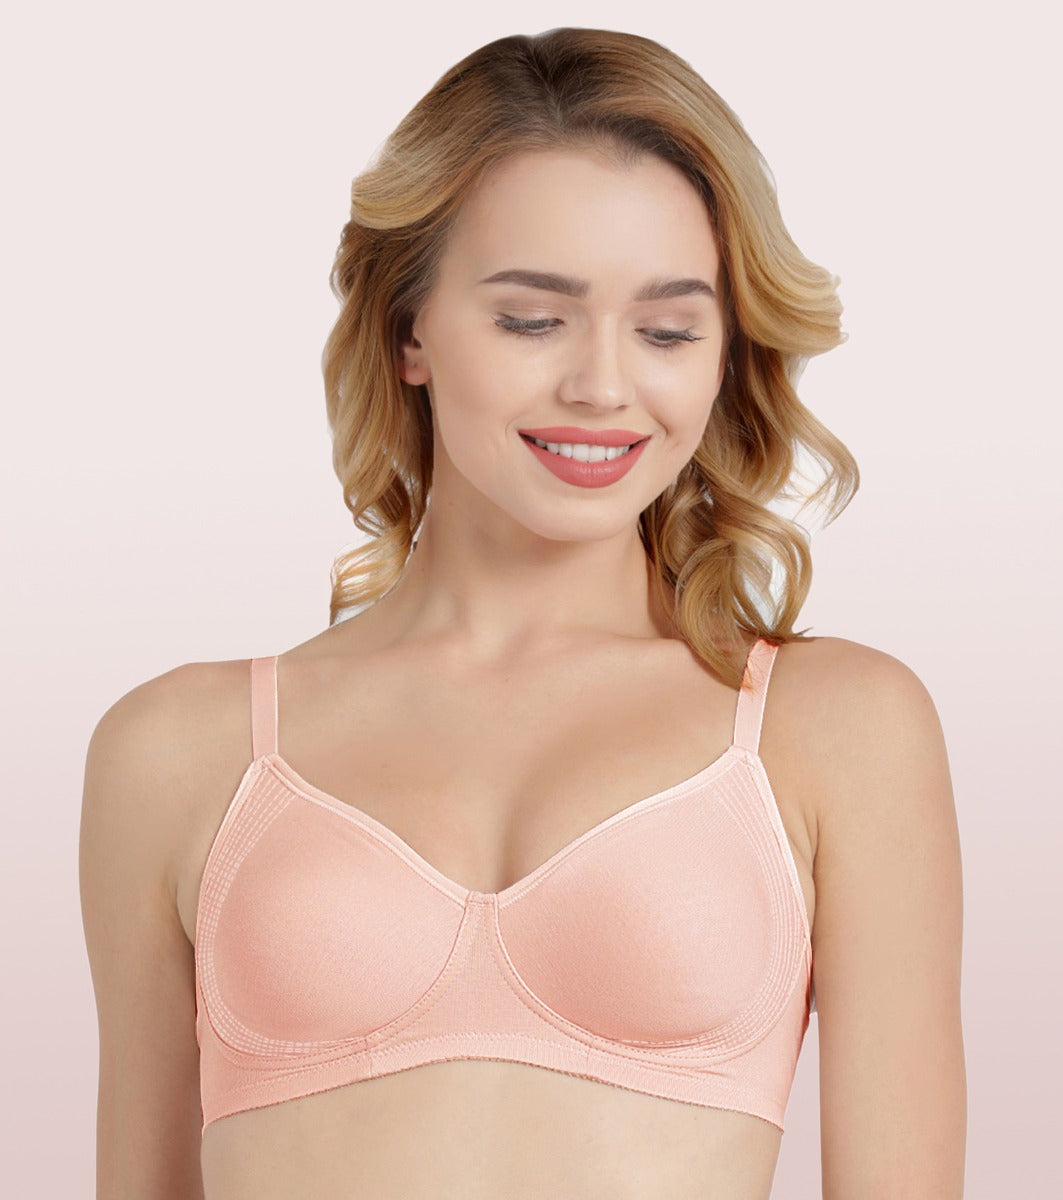 Enamor F092 Wirefree Cami Shaper Multiway Bra Padded Medium Coverage in  Surat at best price by Navya Inner Wear Shop - Justdial